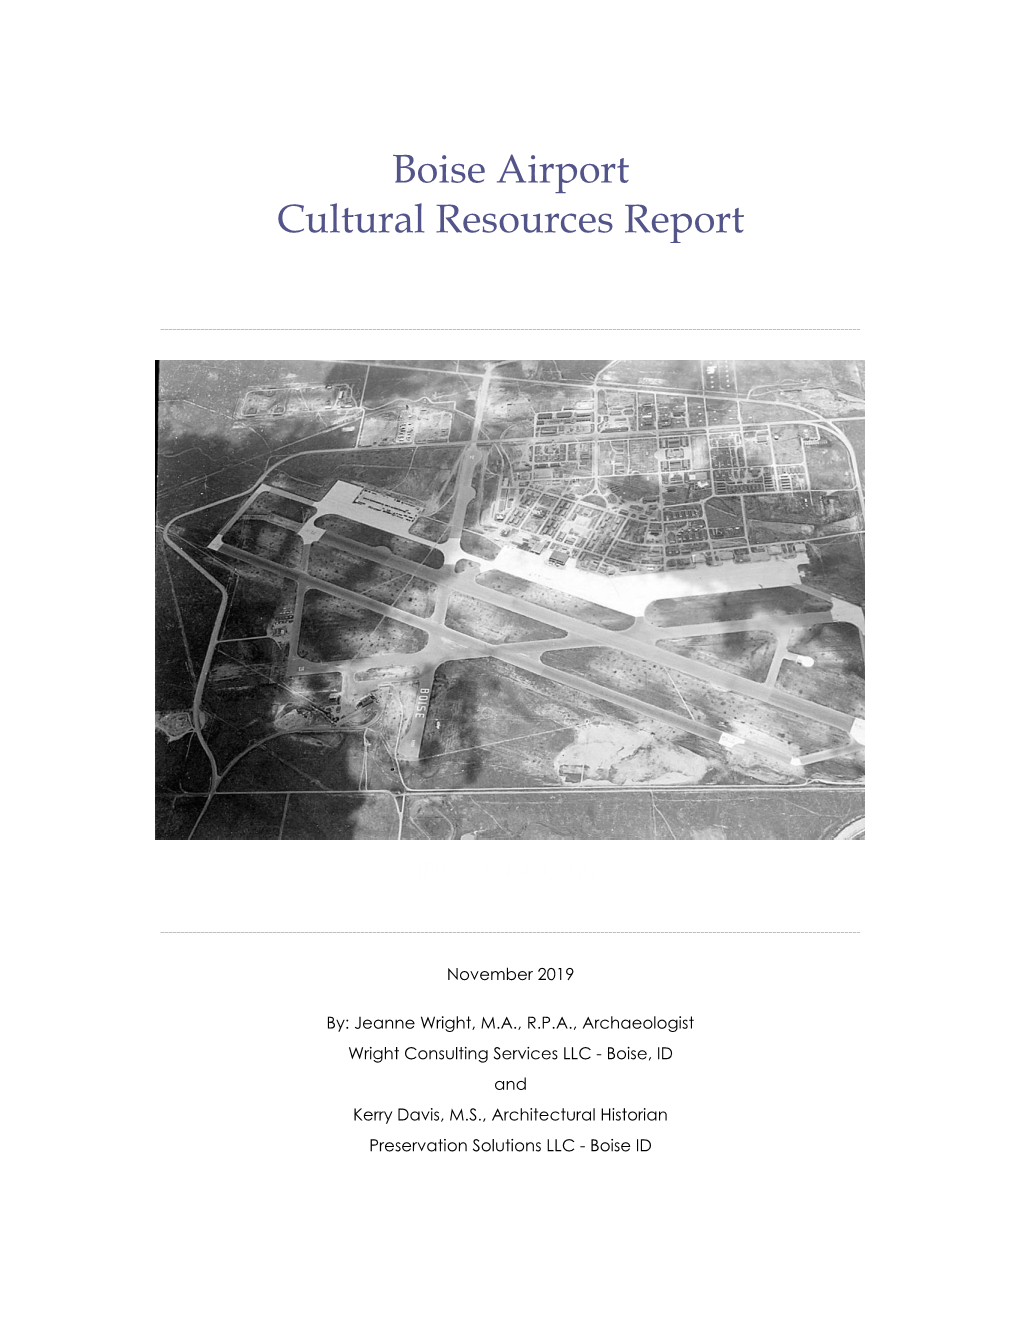 Boise Airport Cultural Resources Report